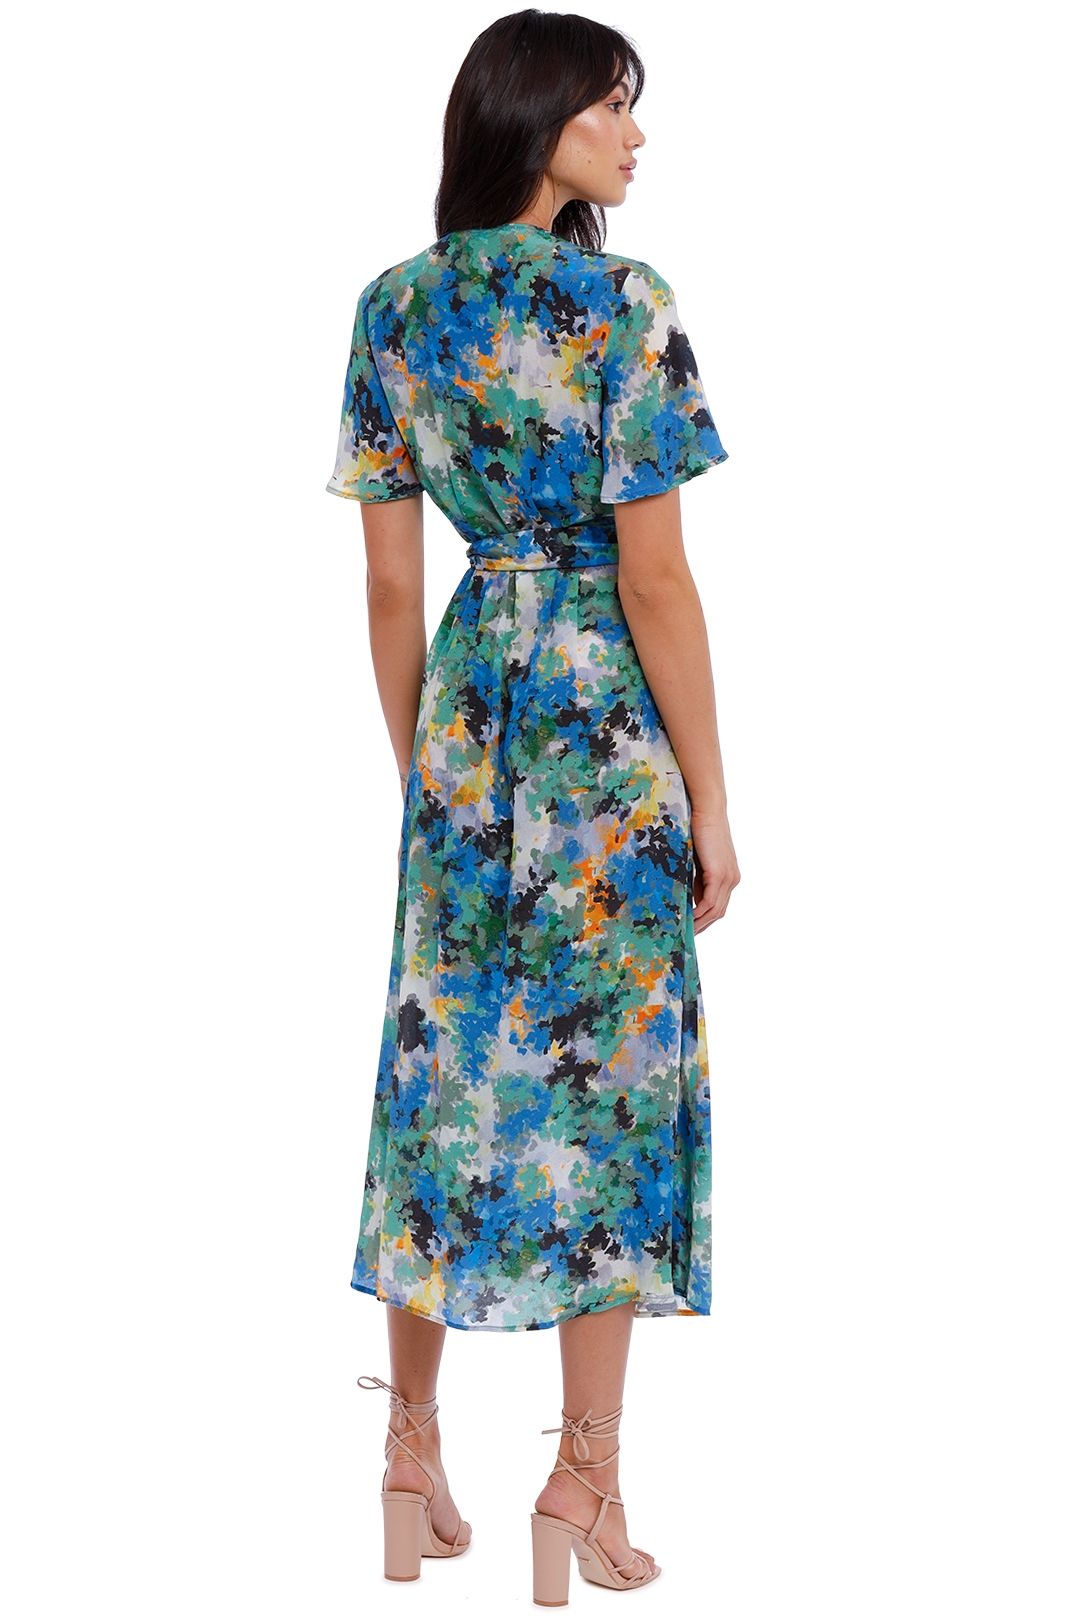 Kate Sylvester Meg Dress in Water Lilies floral